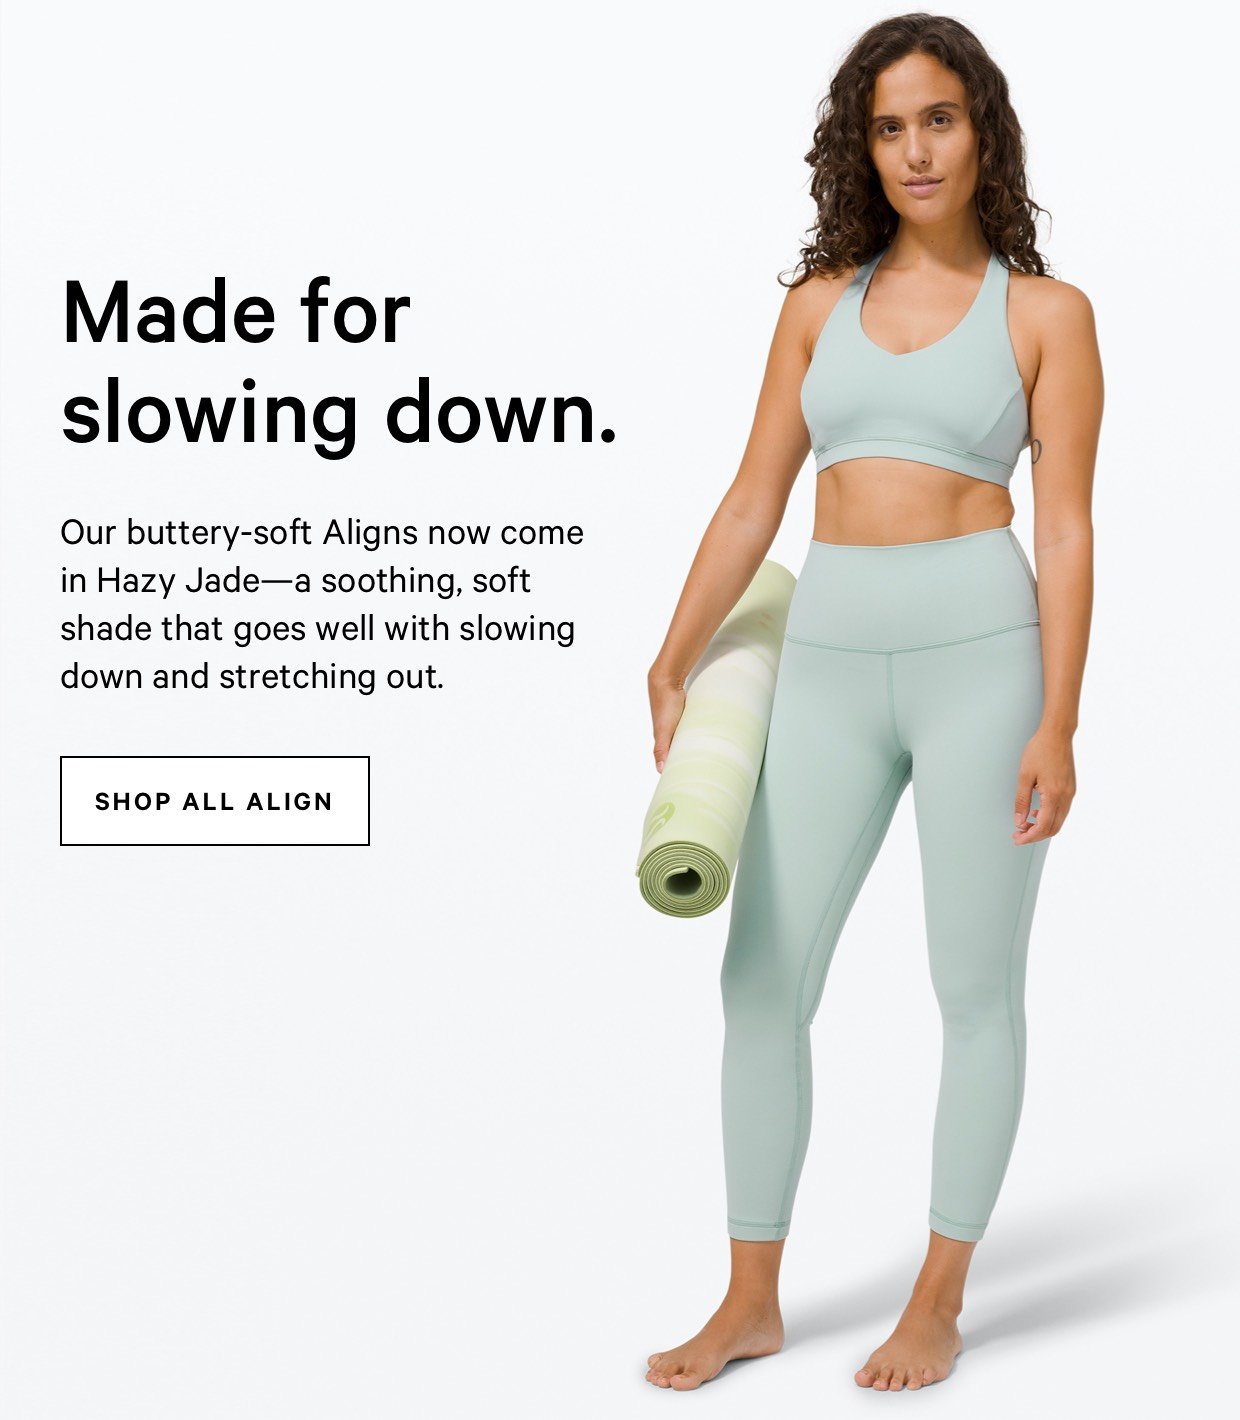 lululemon: Last call to get your gifts 